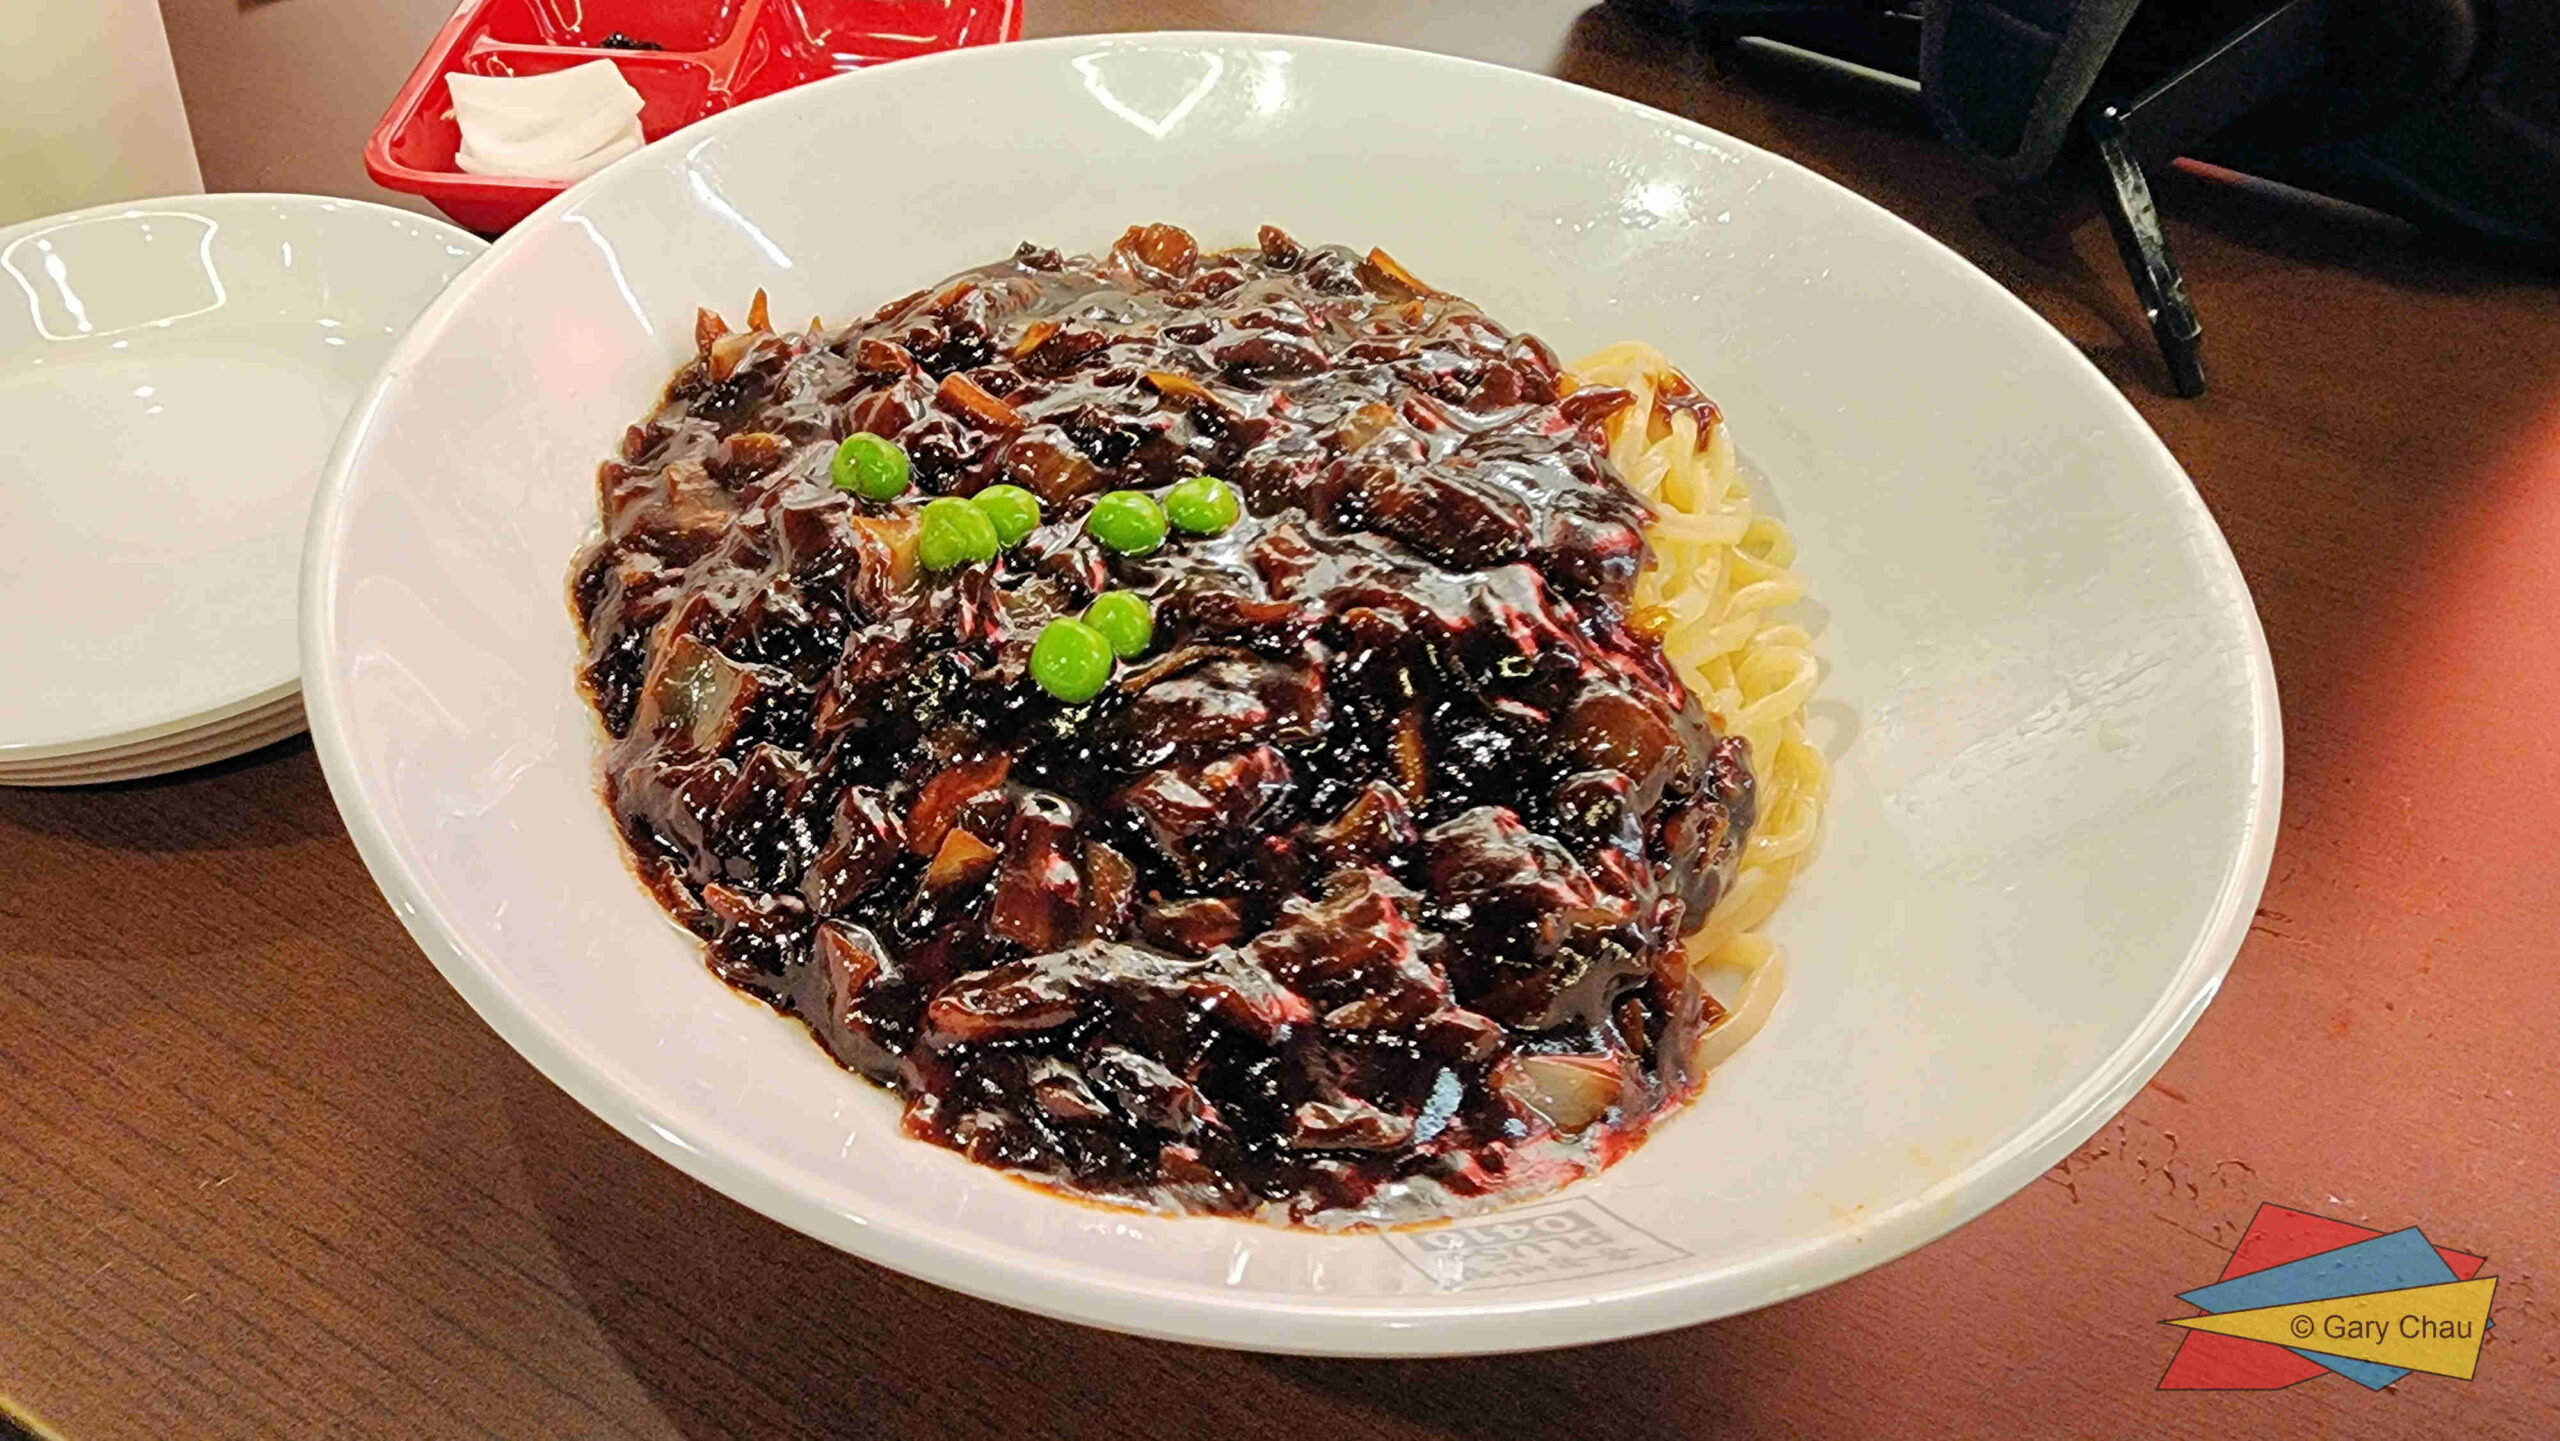 Black Bean Fried Noodles with Seafood and Pork for $11.80